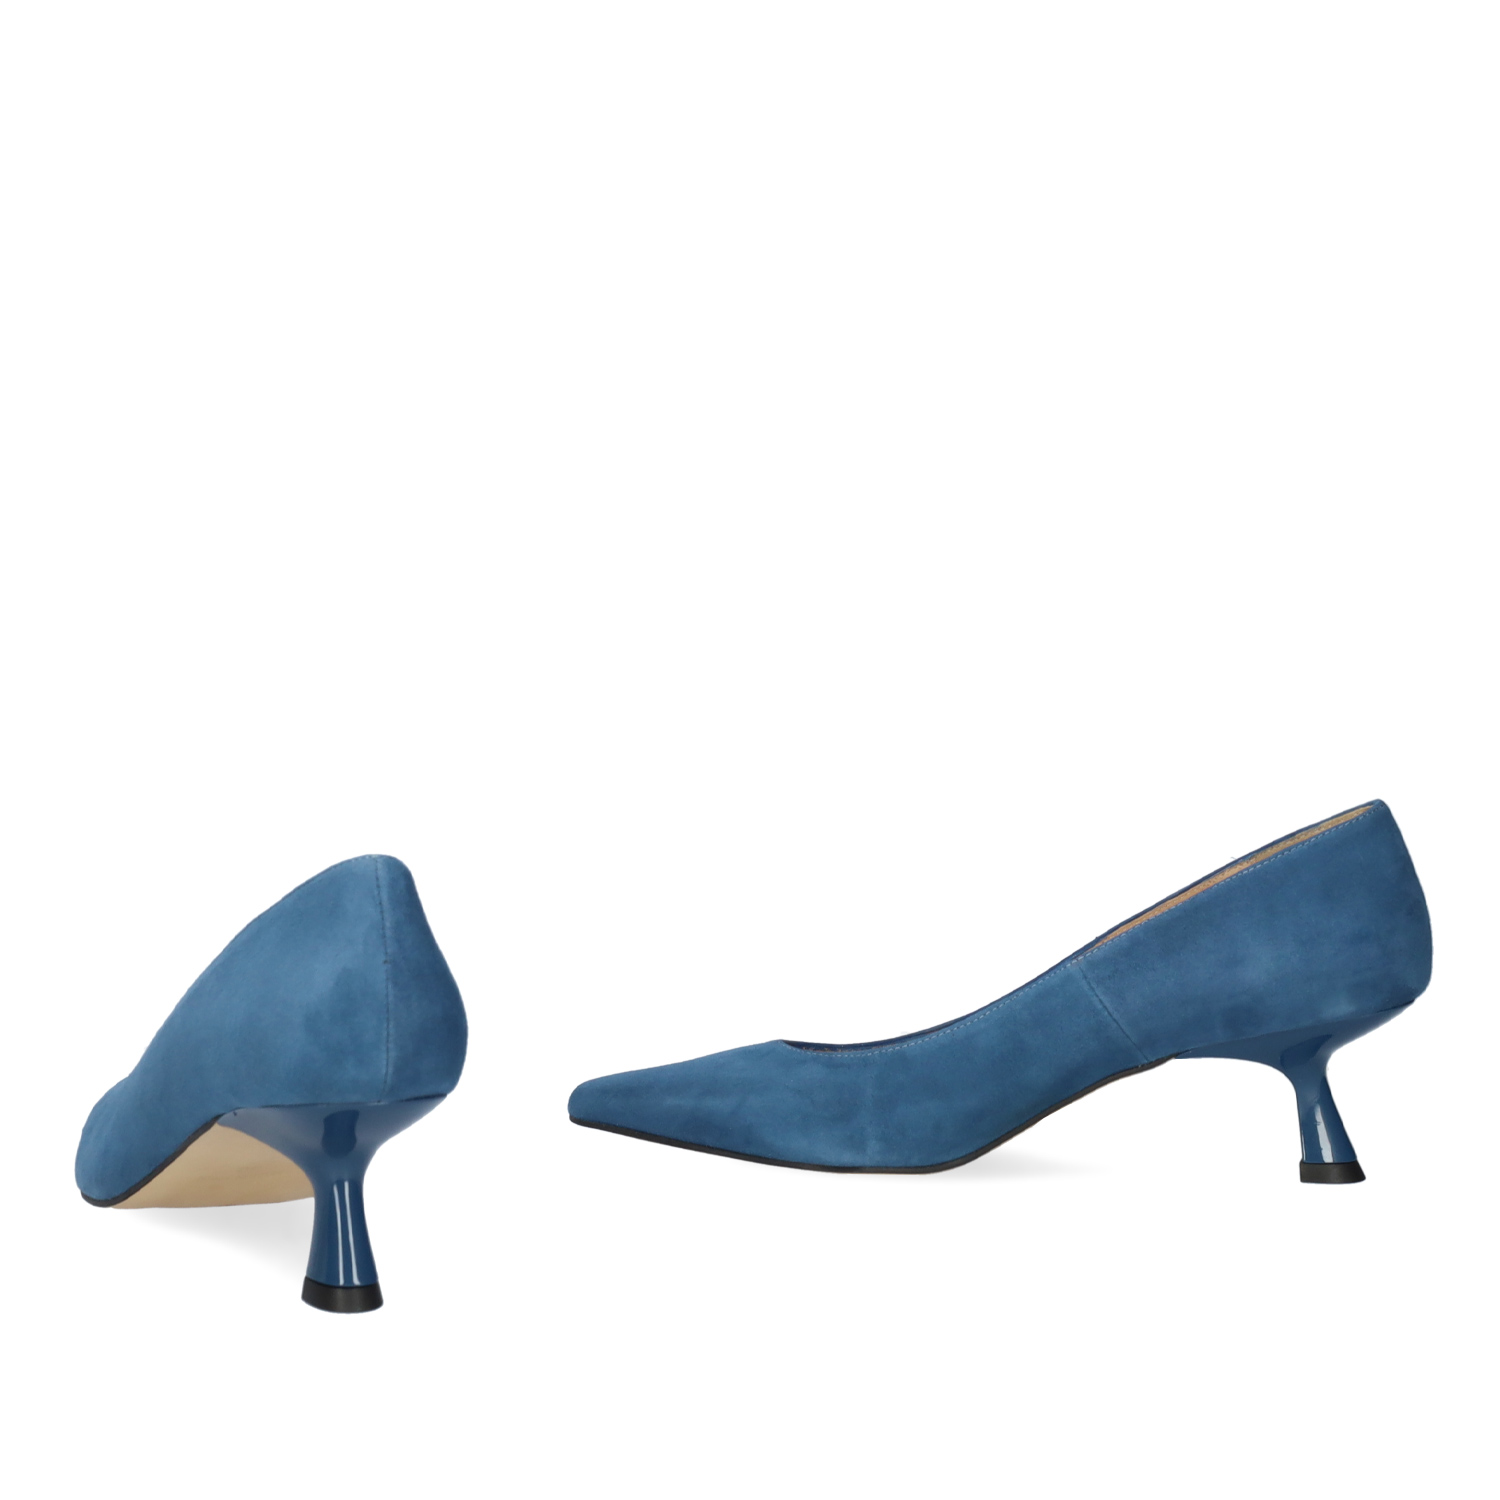 Heeled shoes in navy suede 